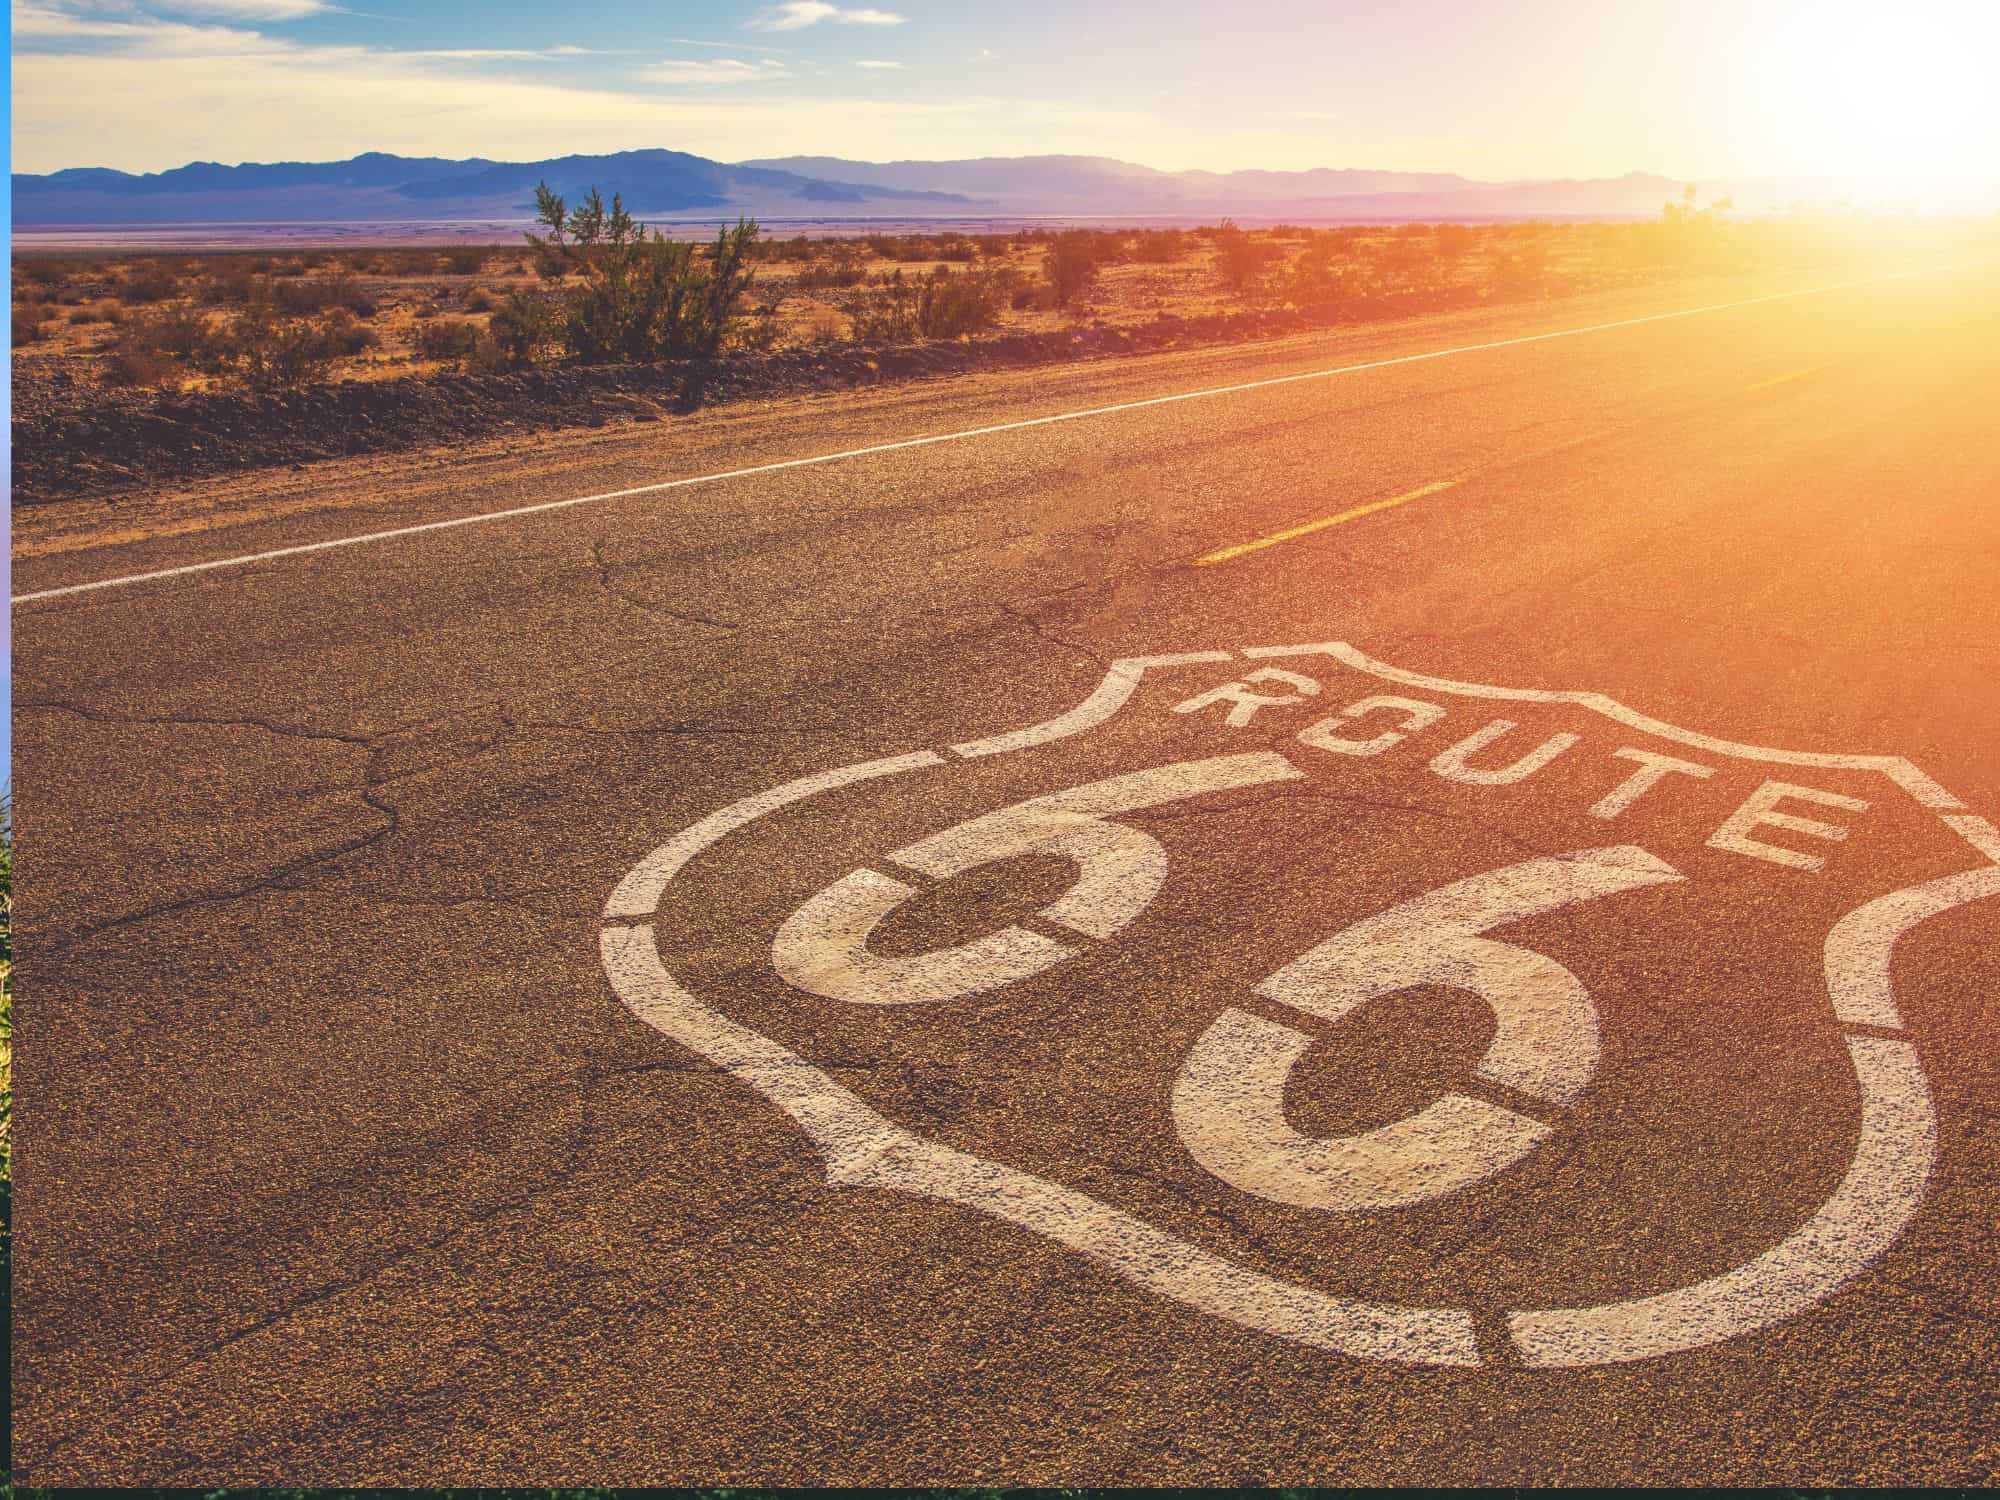 Legendary US road trips - Route 66